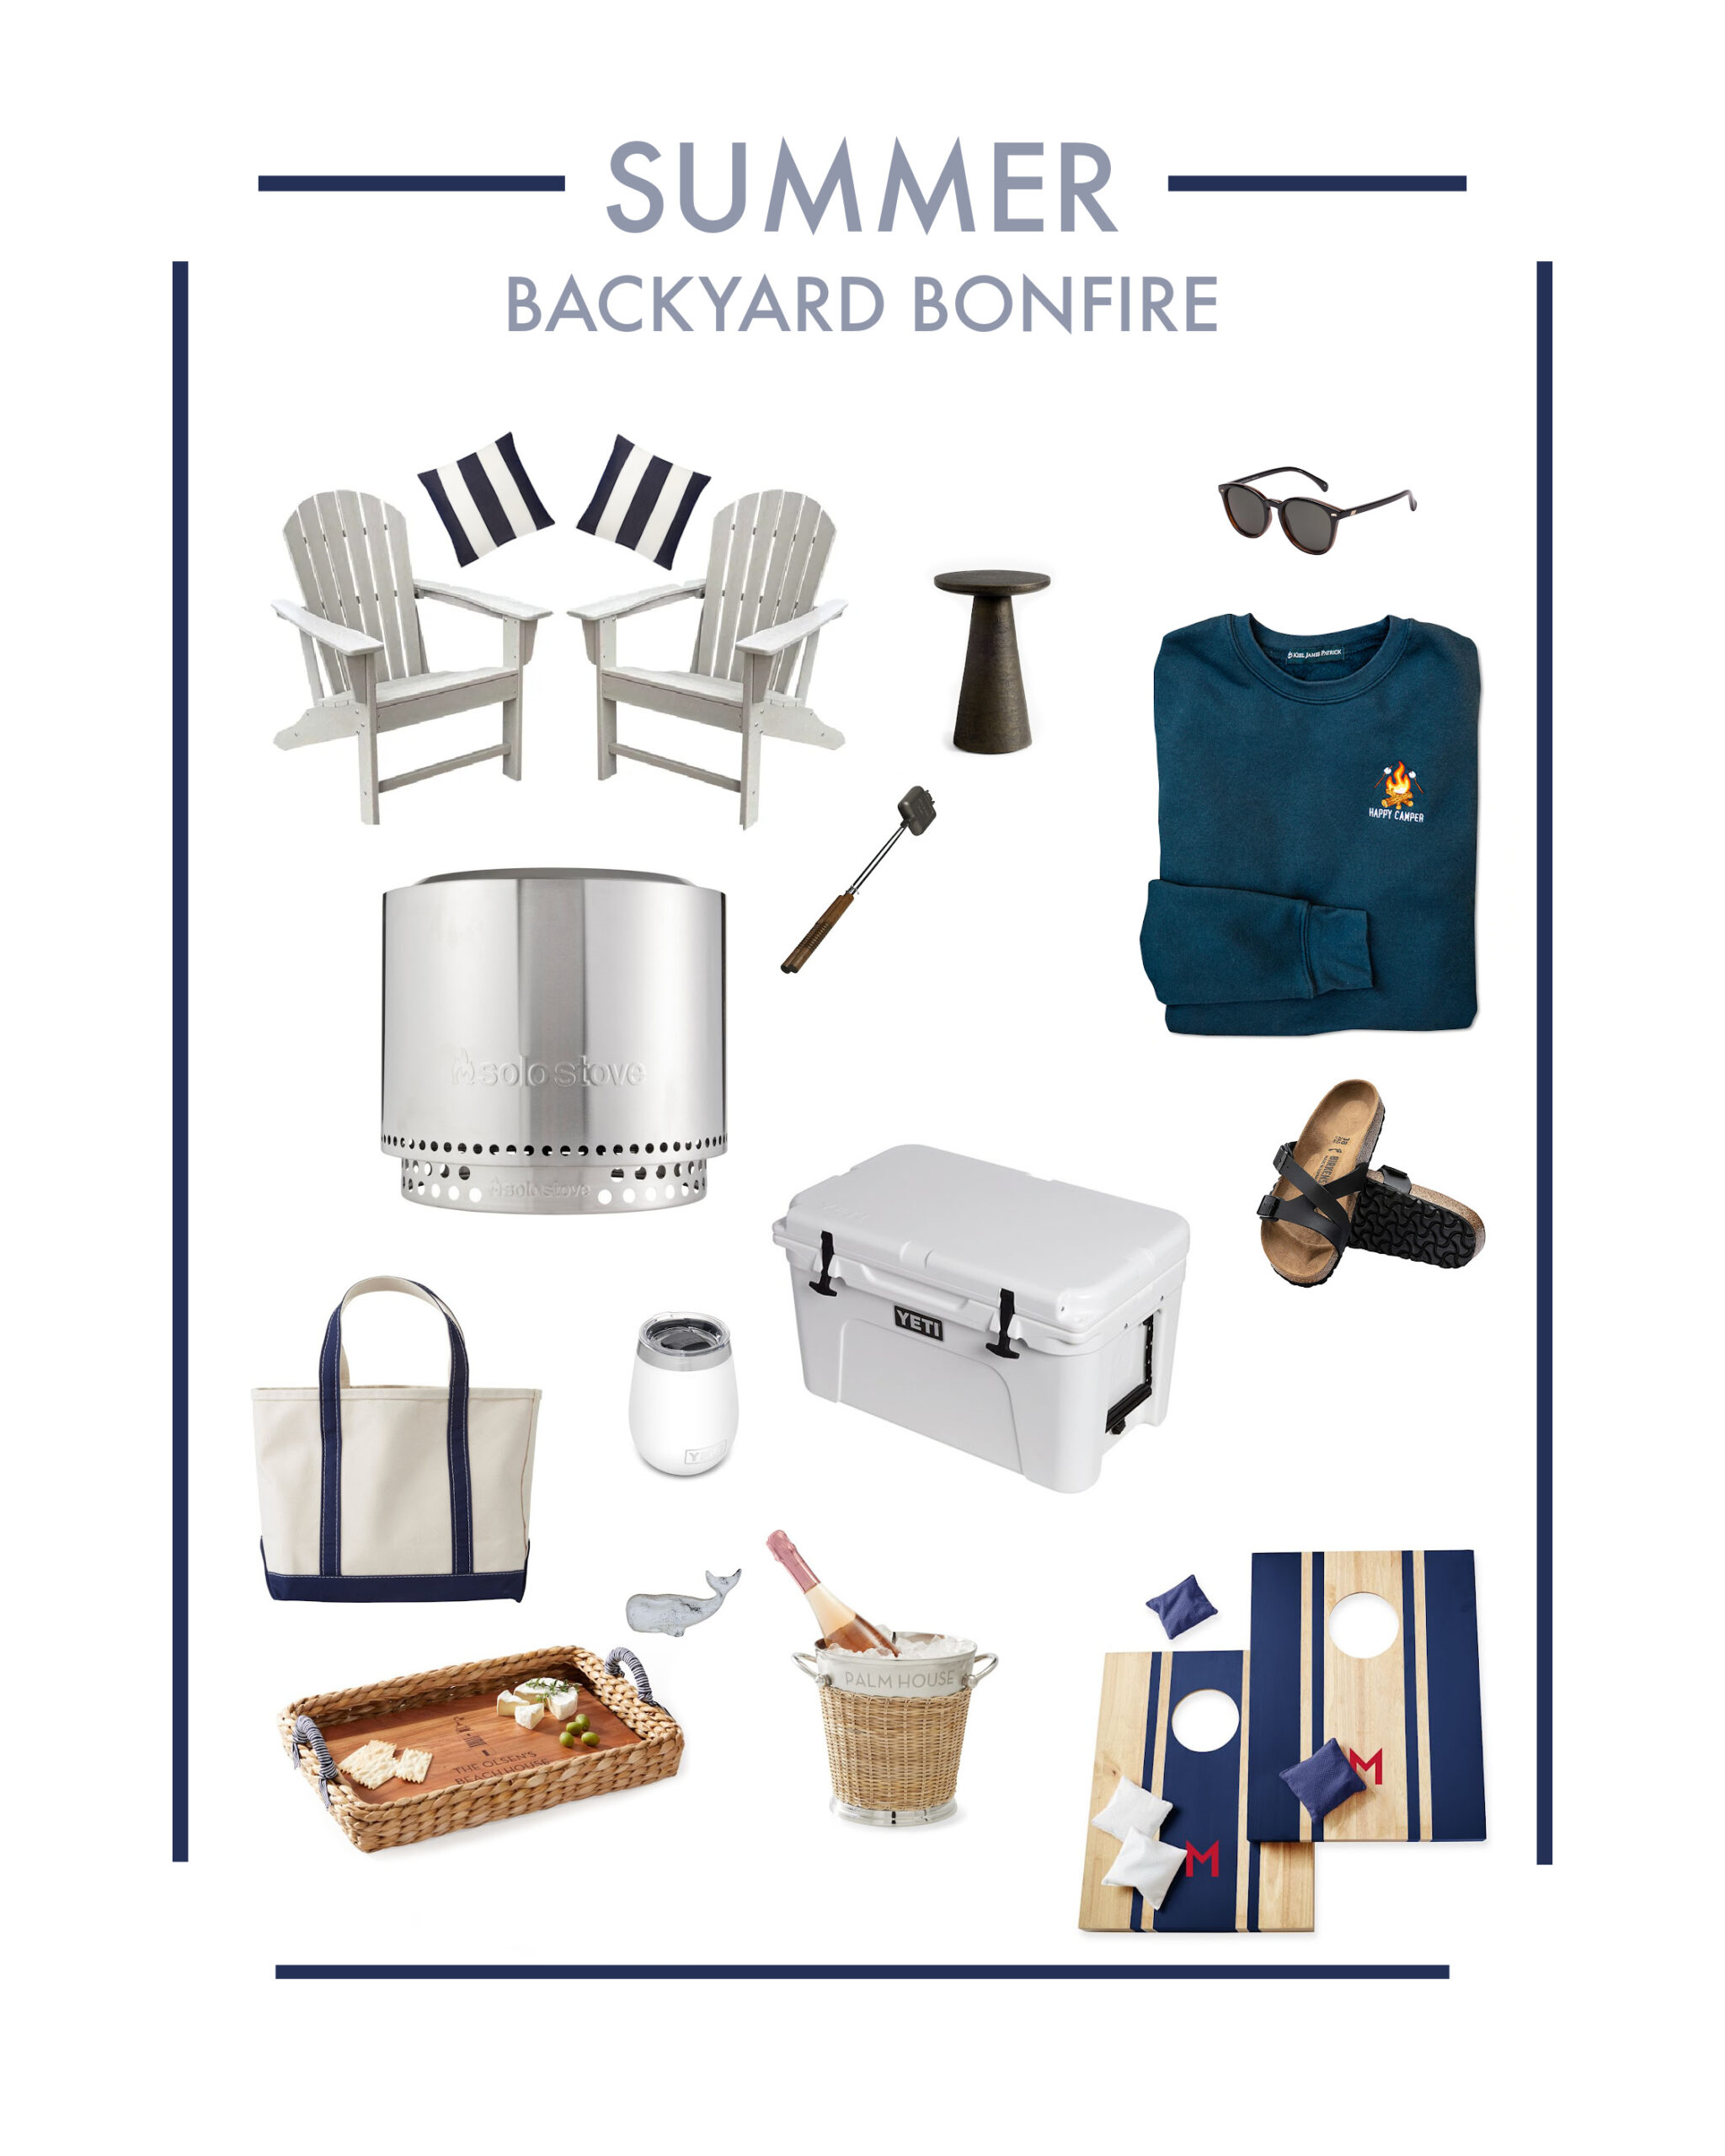 Backyard bonfire parties are a big part of summer in our neighborhood. I put together a little inspiration to help us get ready for the season!